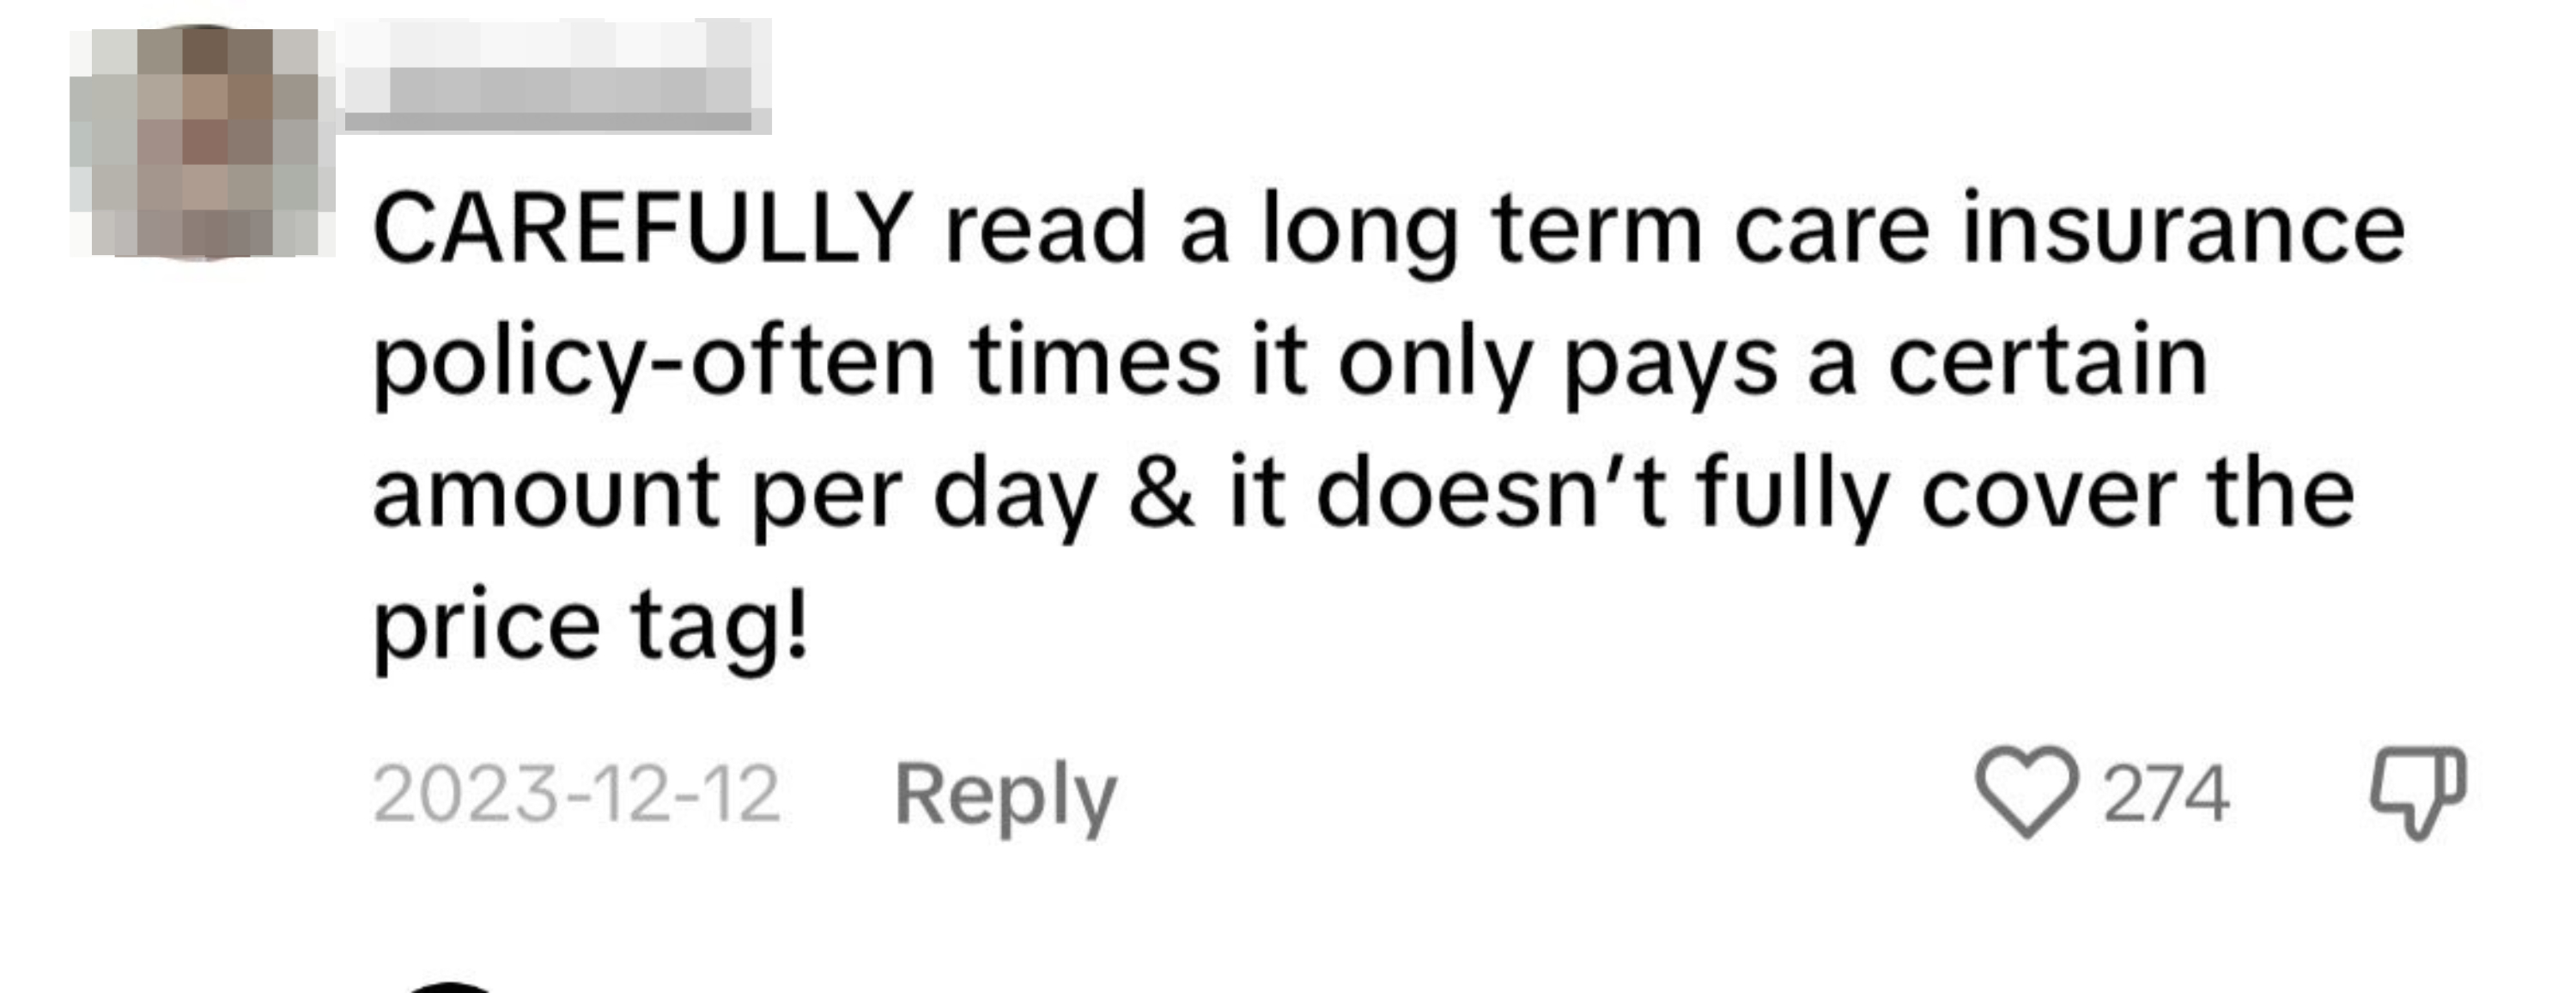 A TikTok comment advises to carefully read your long-term care insurance policy